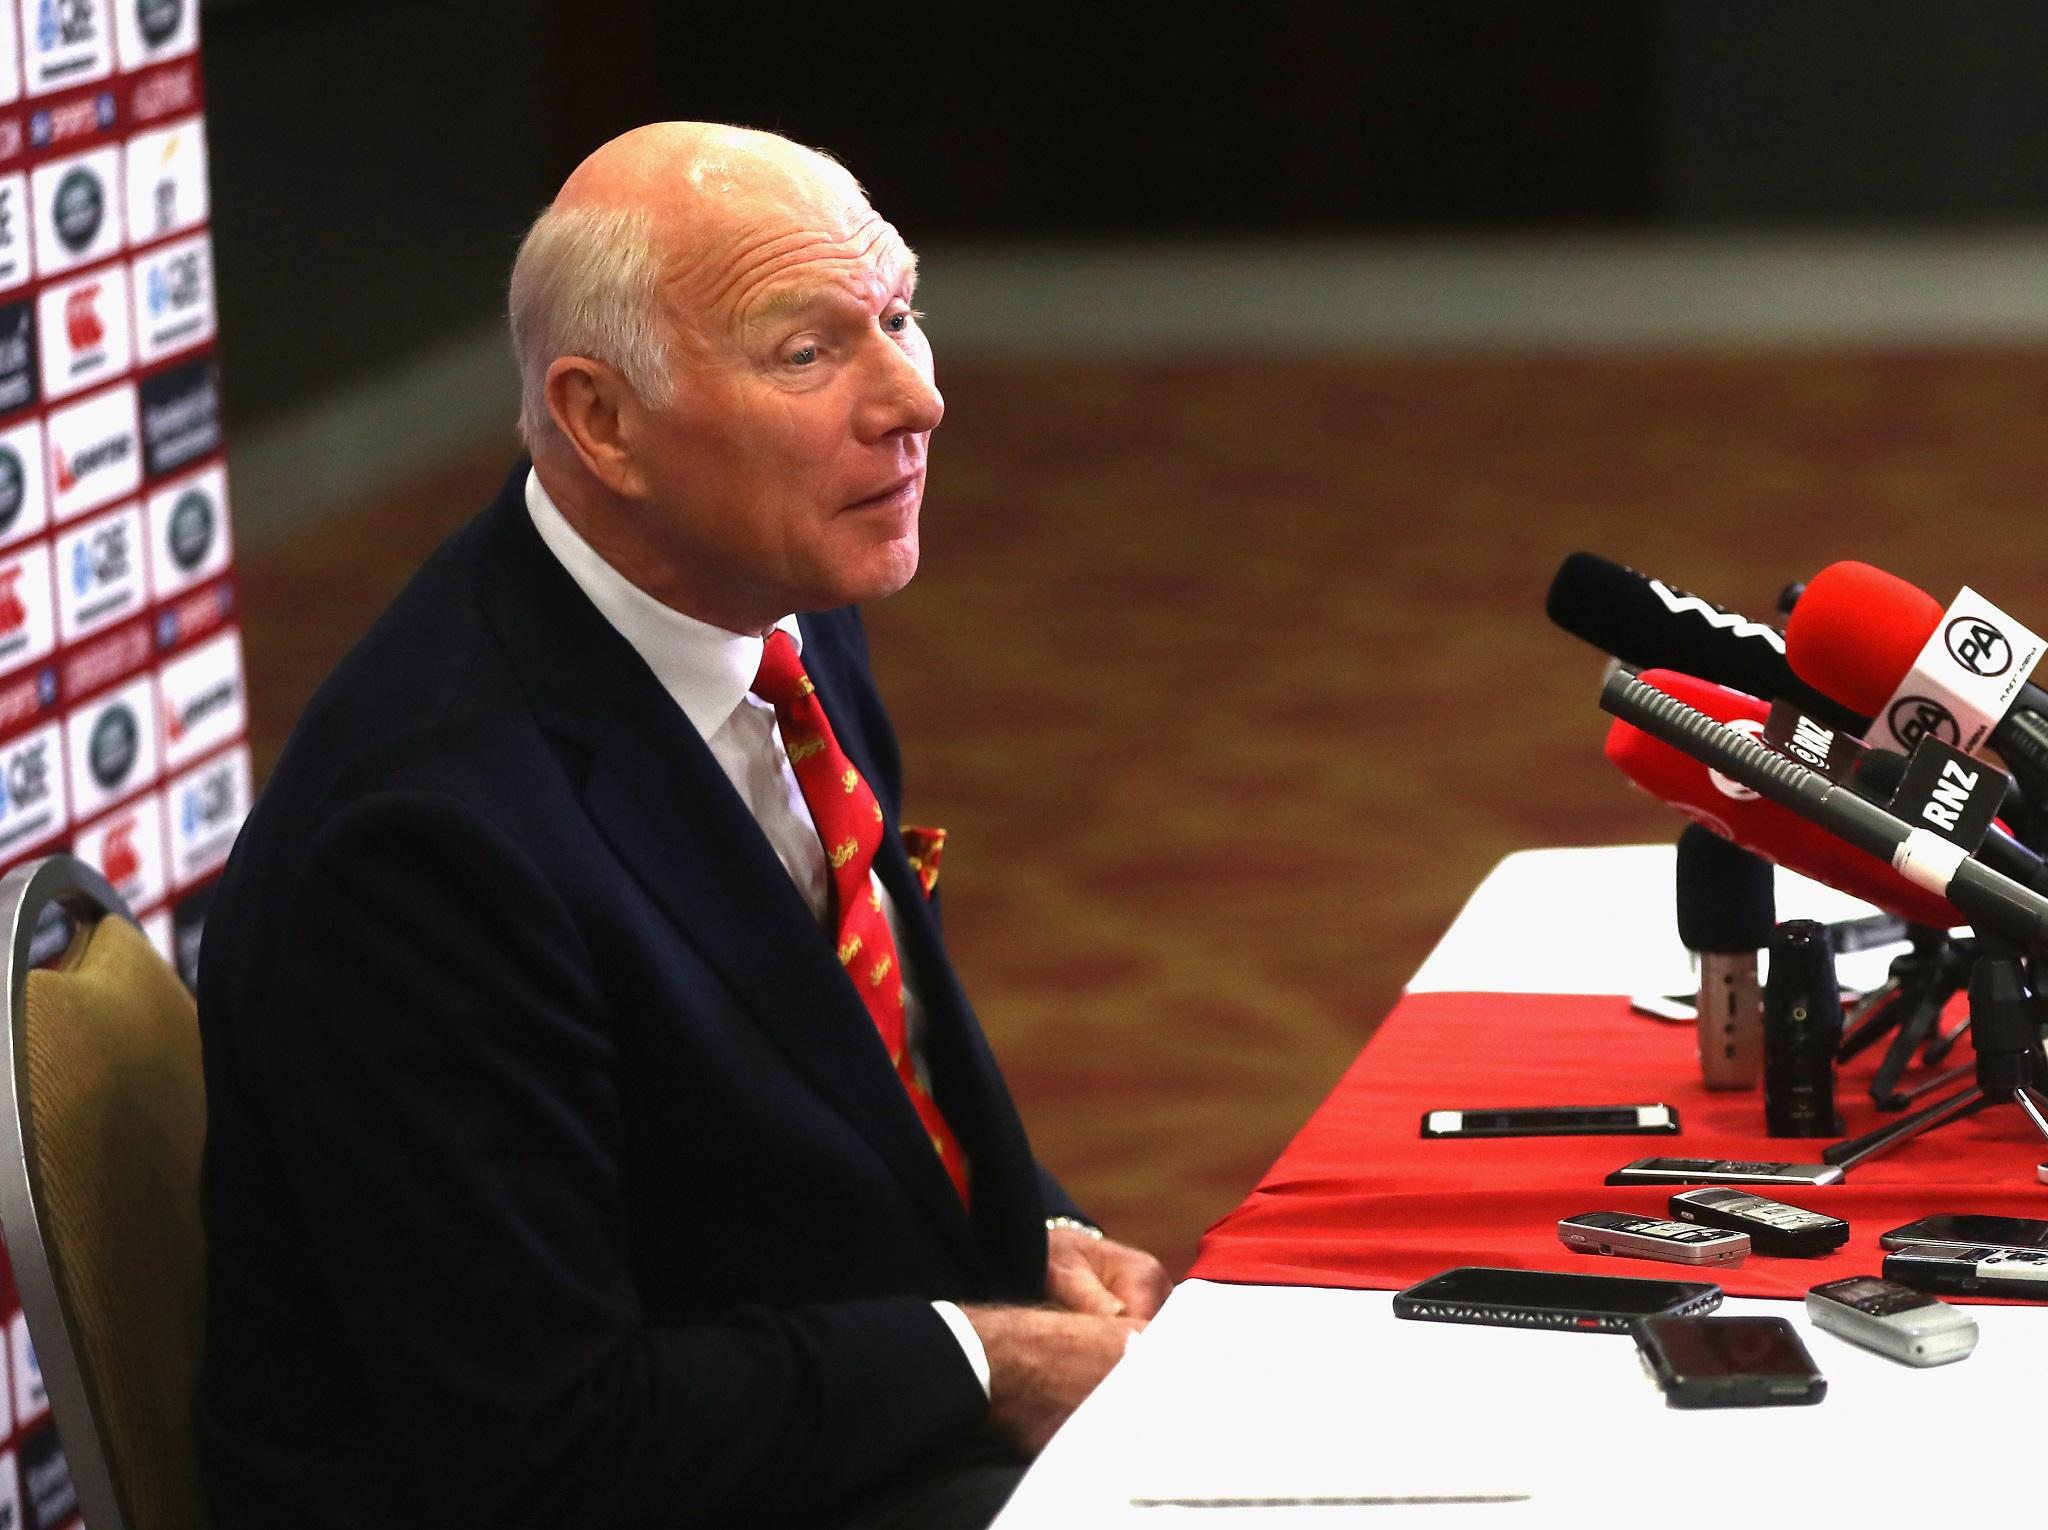 Lions tour manager John Spencer was frustrated with the failure to secure the necessary preparation